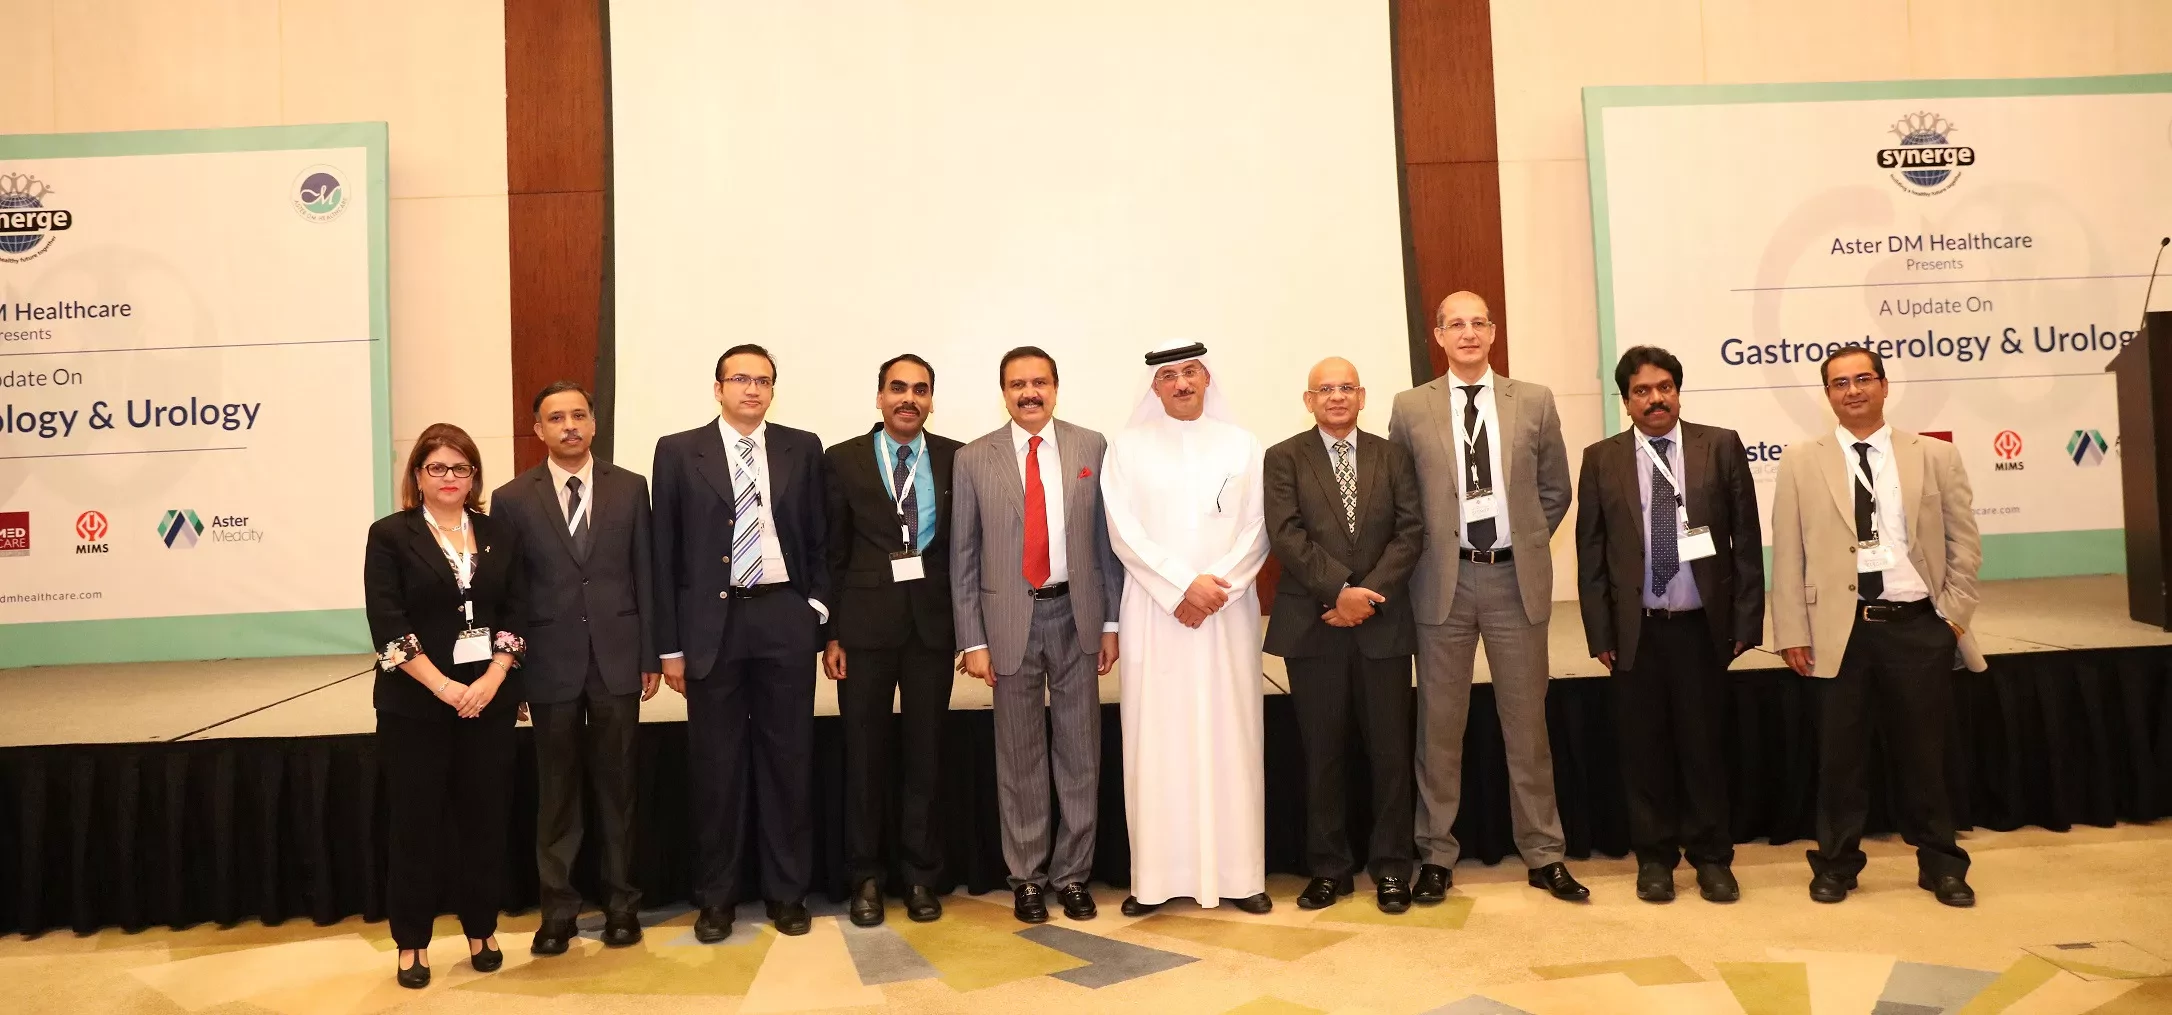 CME_Conference_an_update_on_Gastroenterology_and_Urology-2015_-_photo_1_2.jpg